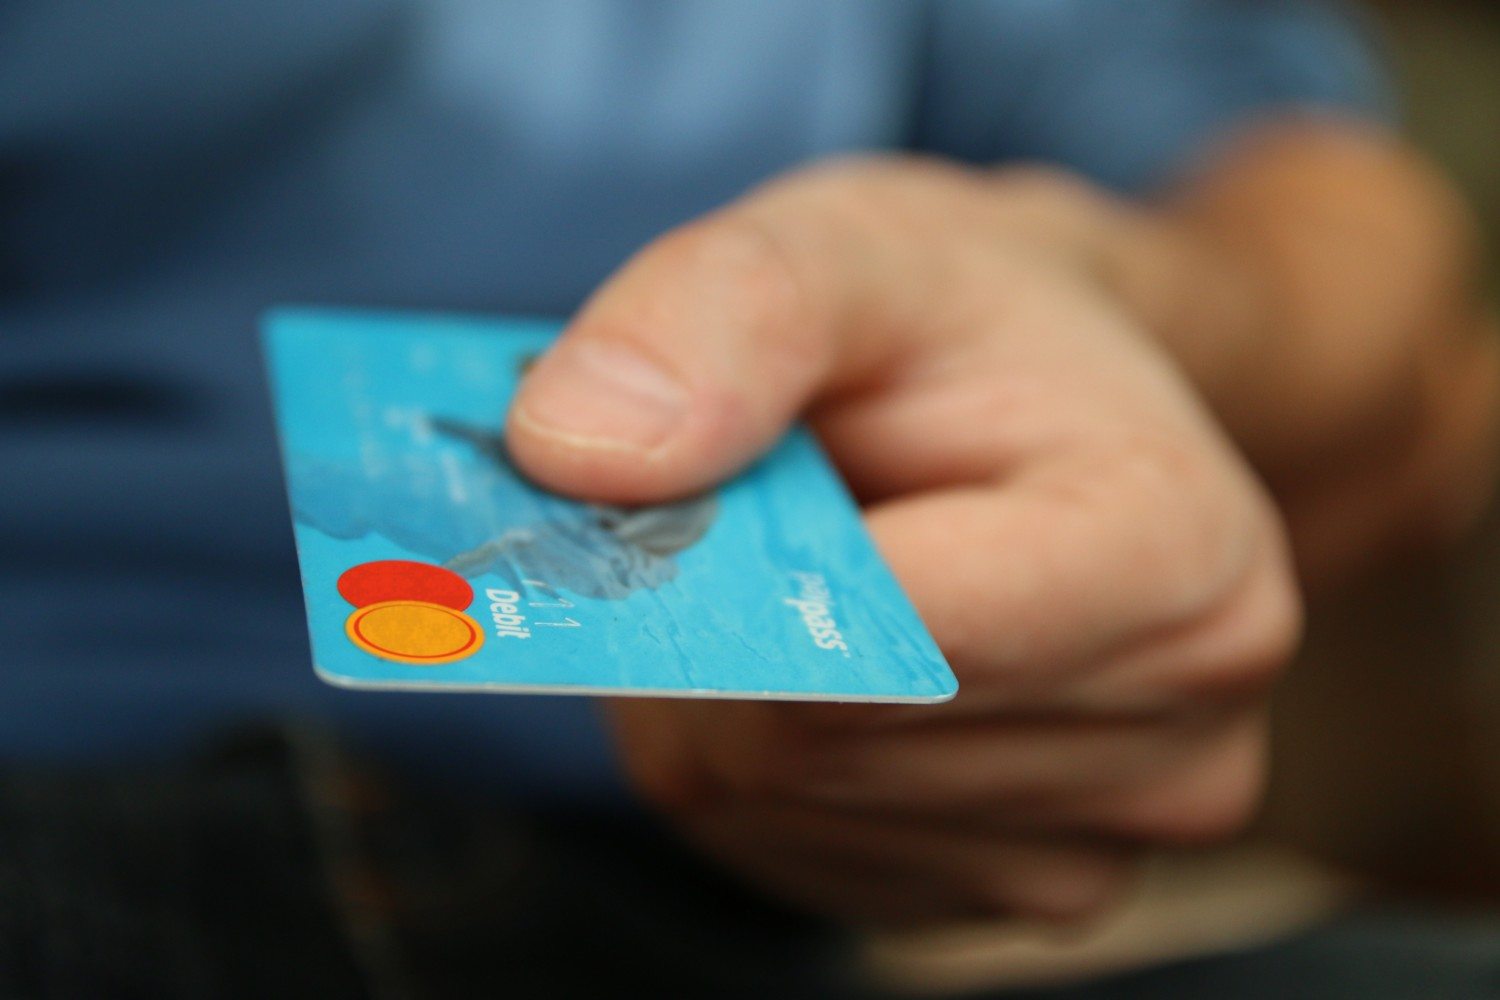 Mastercard Credit card purchase Buying